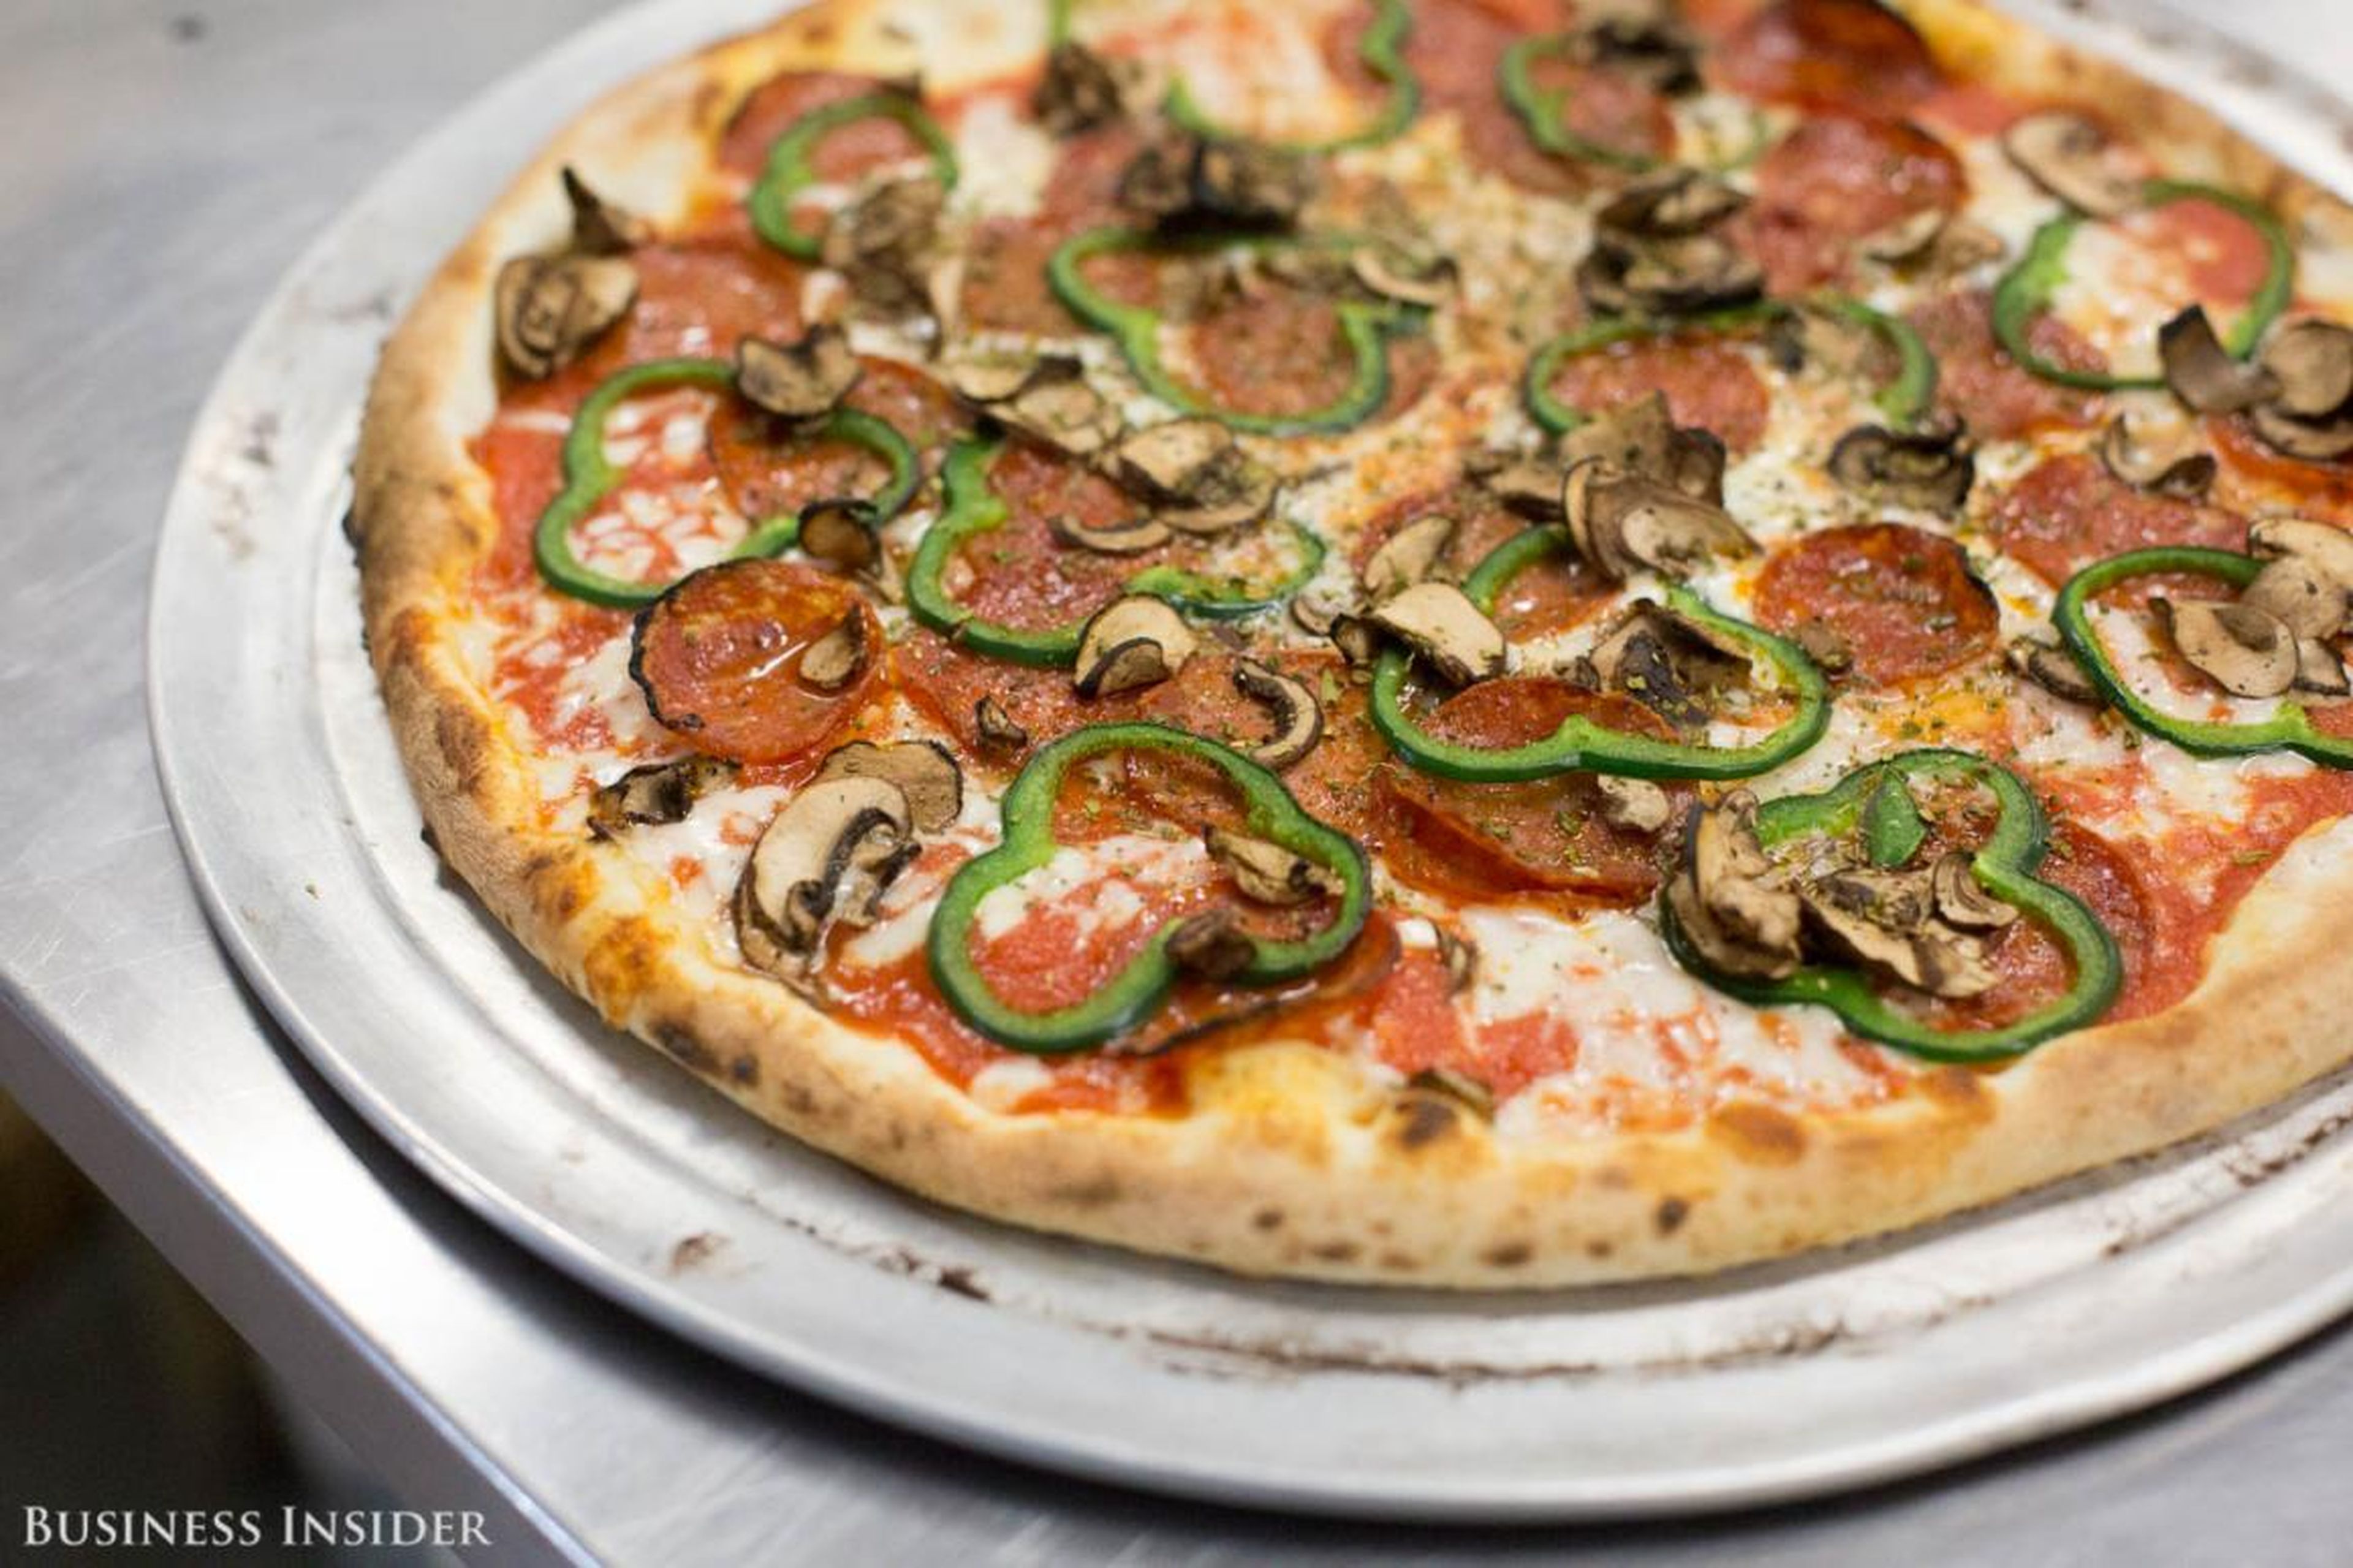 This is no ordinary pizza. It was made by robots.